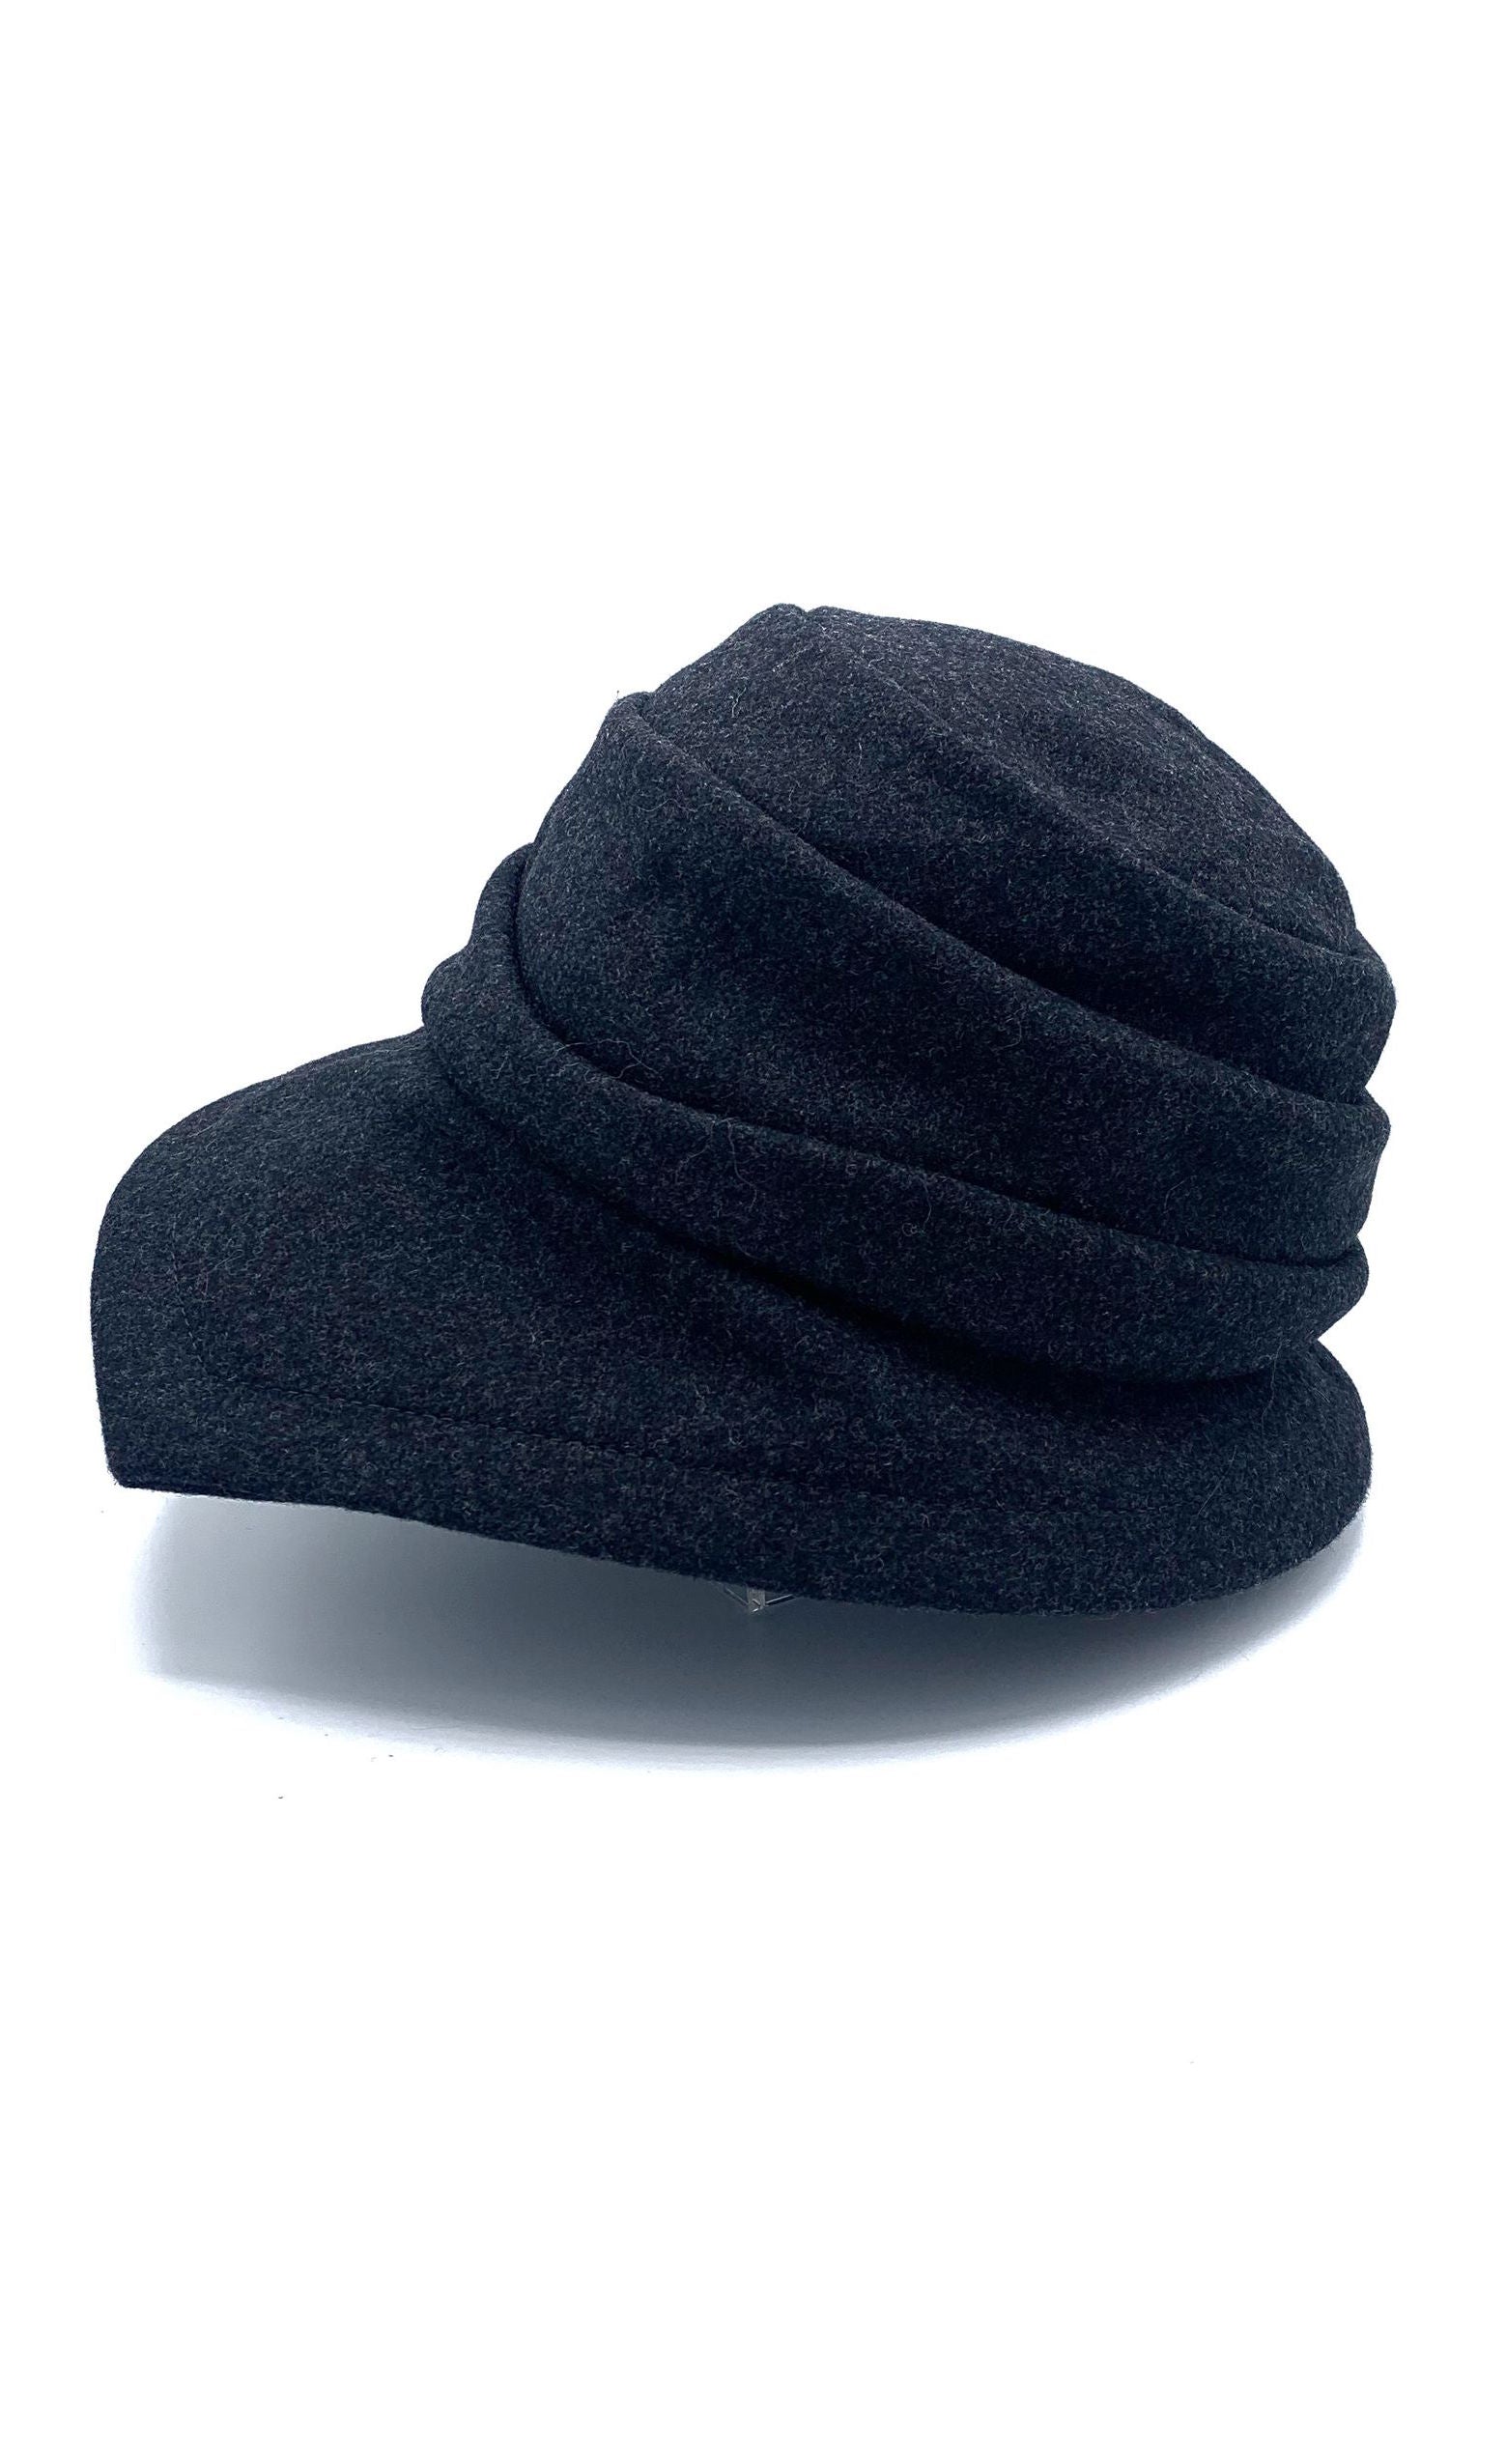 left side view of the lillie & cohoe midnight phoebe wool classic hat. This hat has a tiered/layered crown and an asymmetrical brim that points to the left.